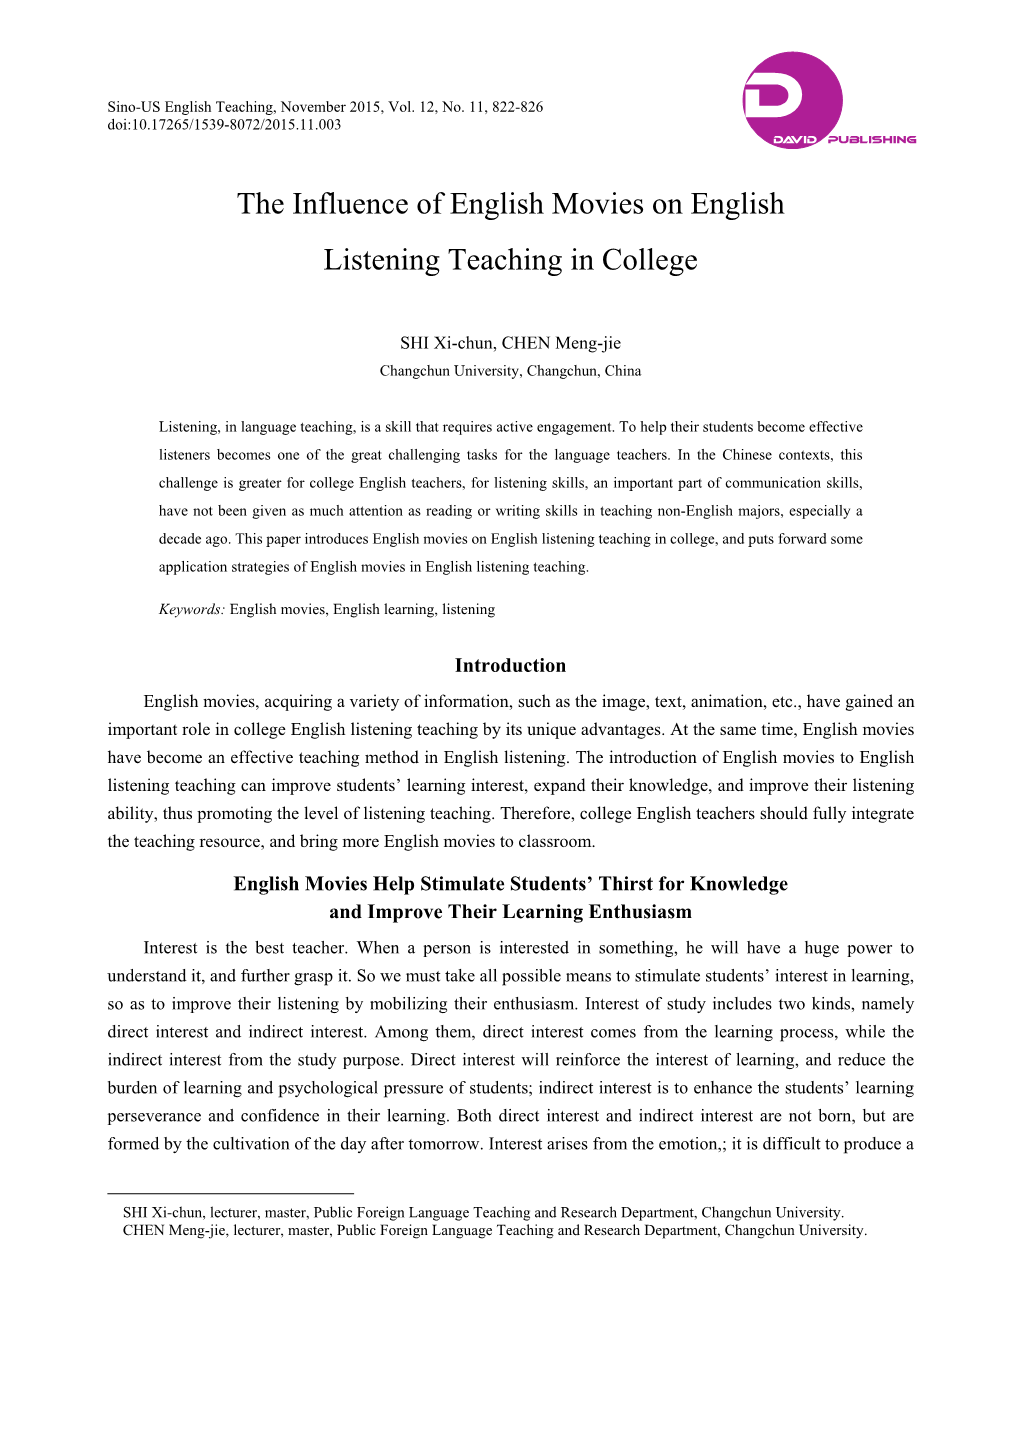 The Influence of English Movies on English Listening Teaching in College